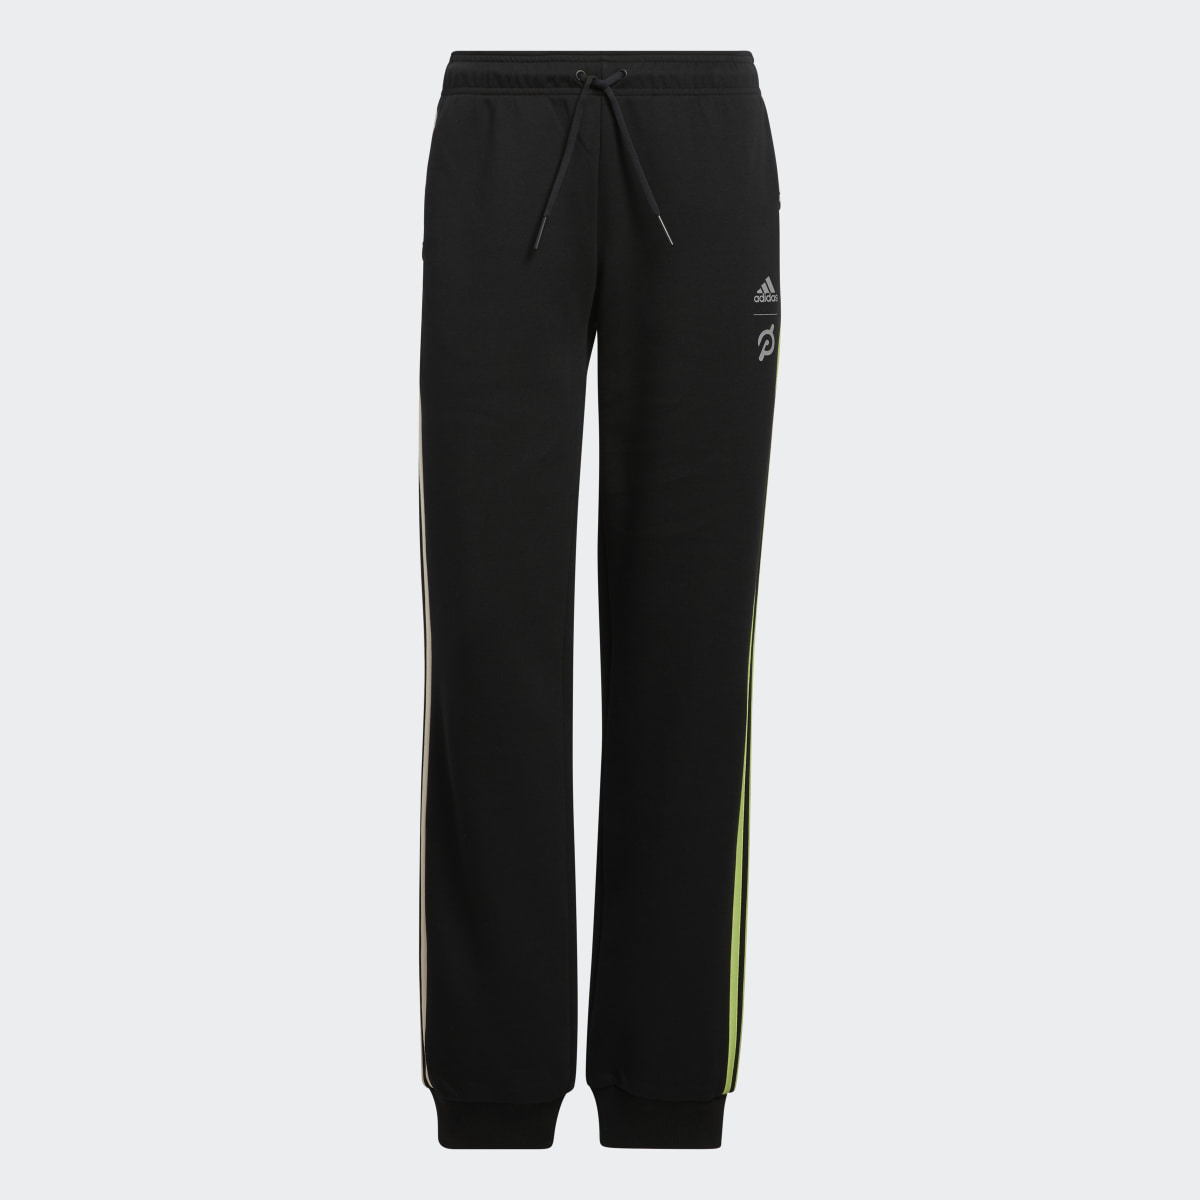 Adidas Capable of Greatness Joggers. 4